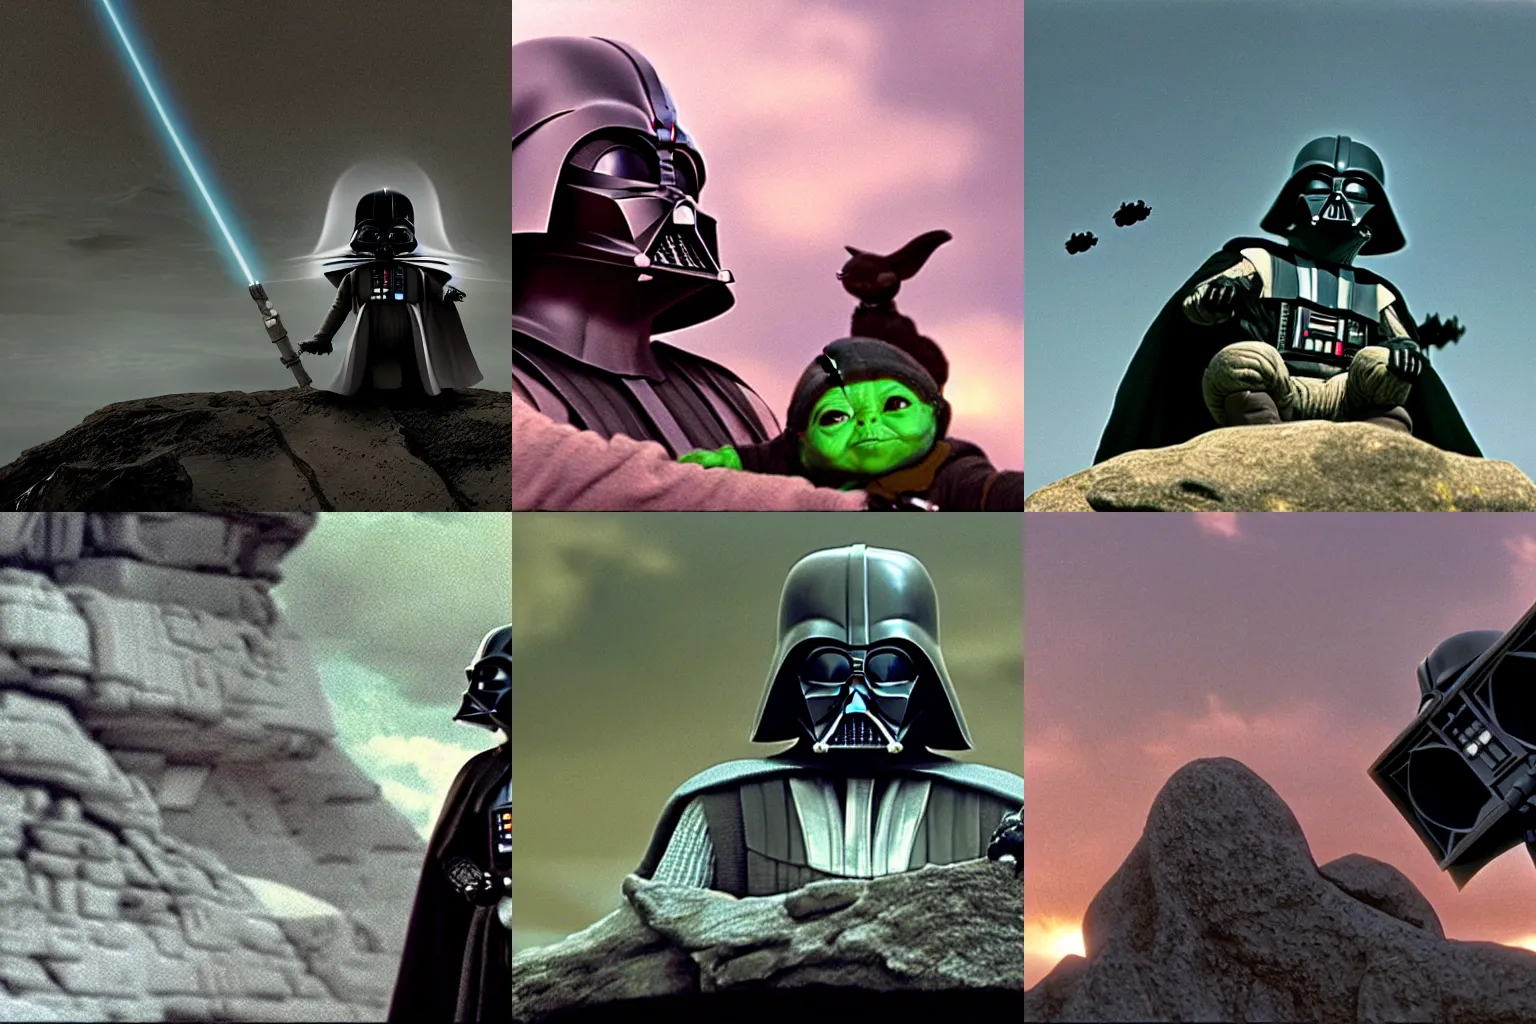 Prompt: far up in the sky an outline of Darth Vader's TIE fighter approaches and below baby yoda sits on an ancient boulder singing songs to himself, movie still, promotional image, imax 70 mm footage